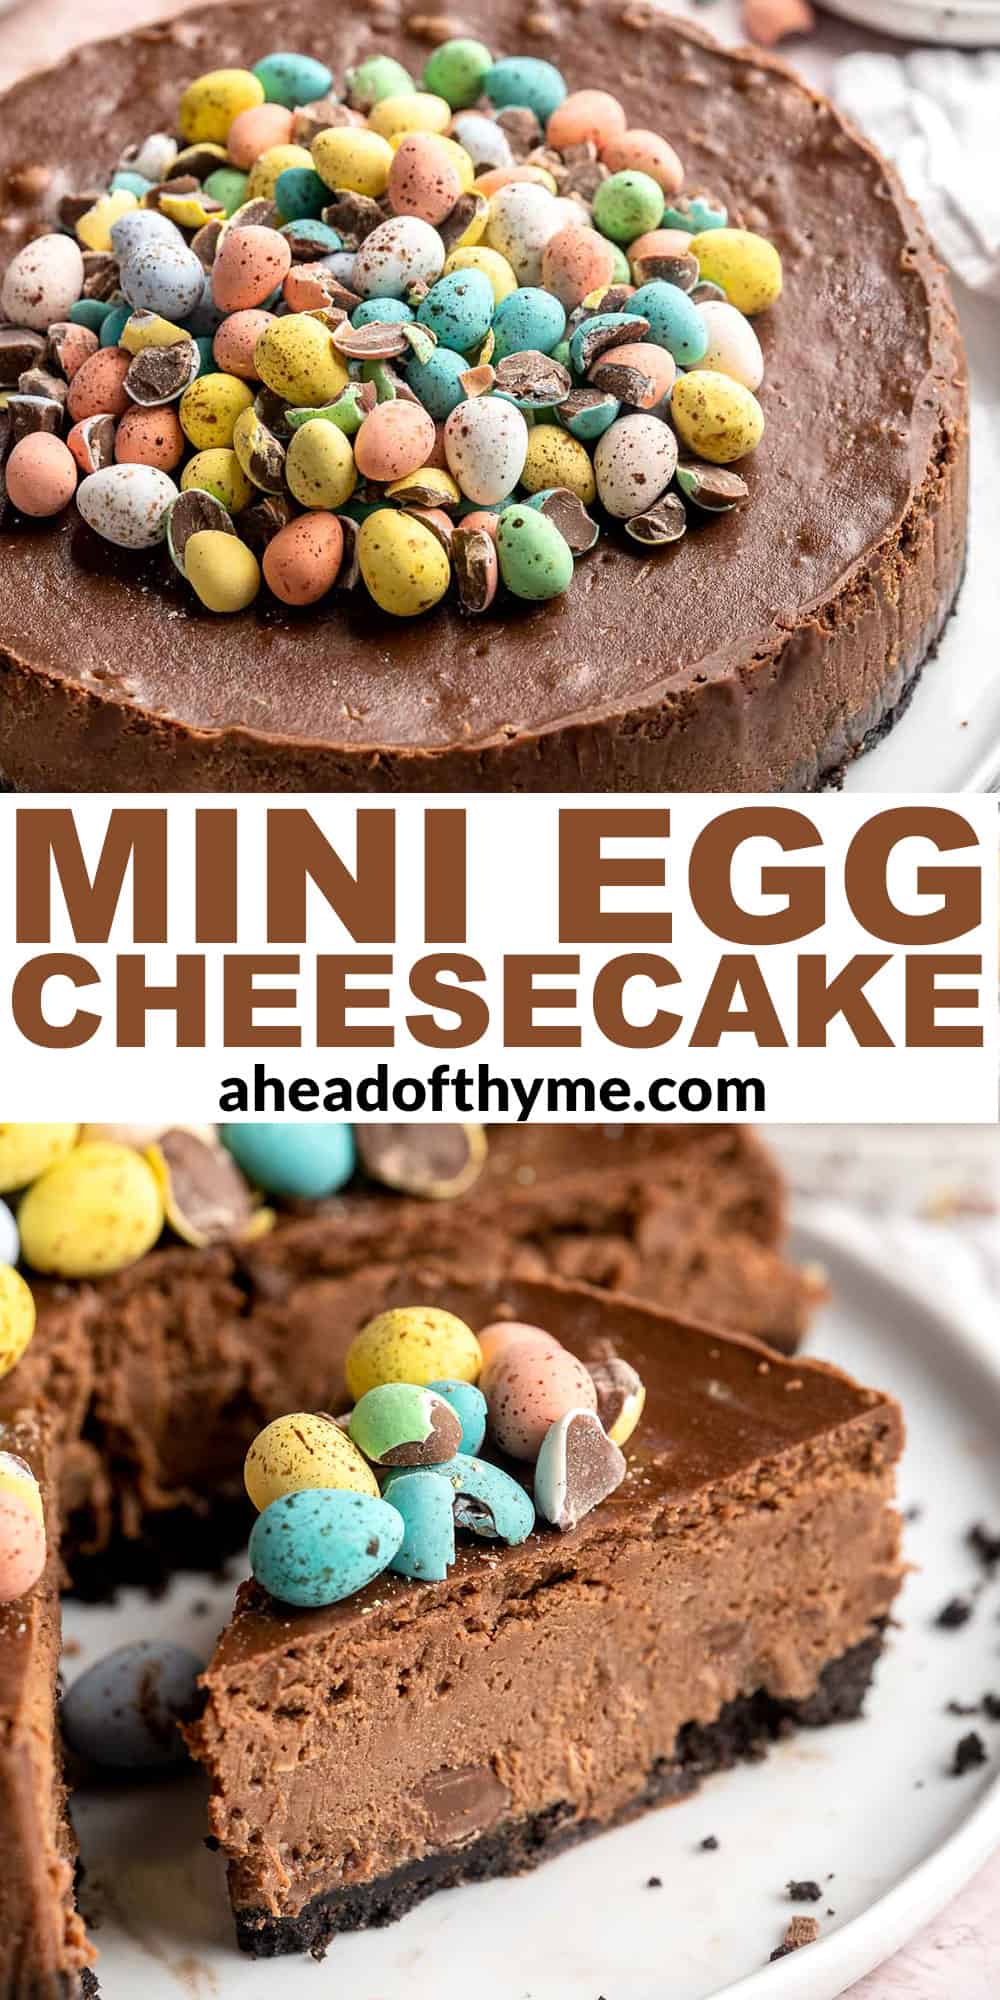 Mini Egg Easter Cheesecake is a rich and decadent triple chocolate cheesecake with an Oreo crust, chocolate cheesecake filling, and topped with mini eggs. | aheadofthyme.com